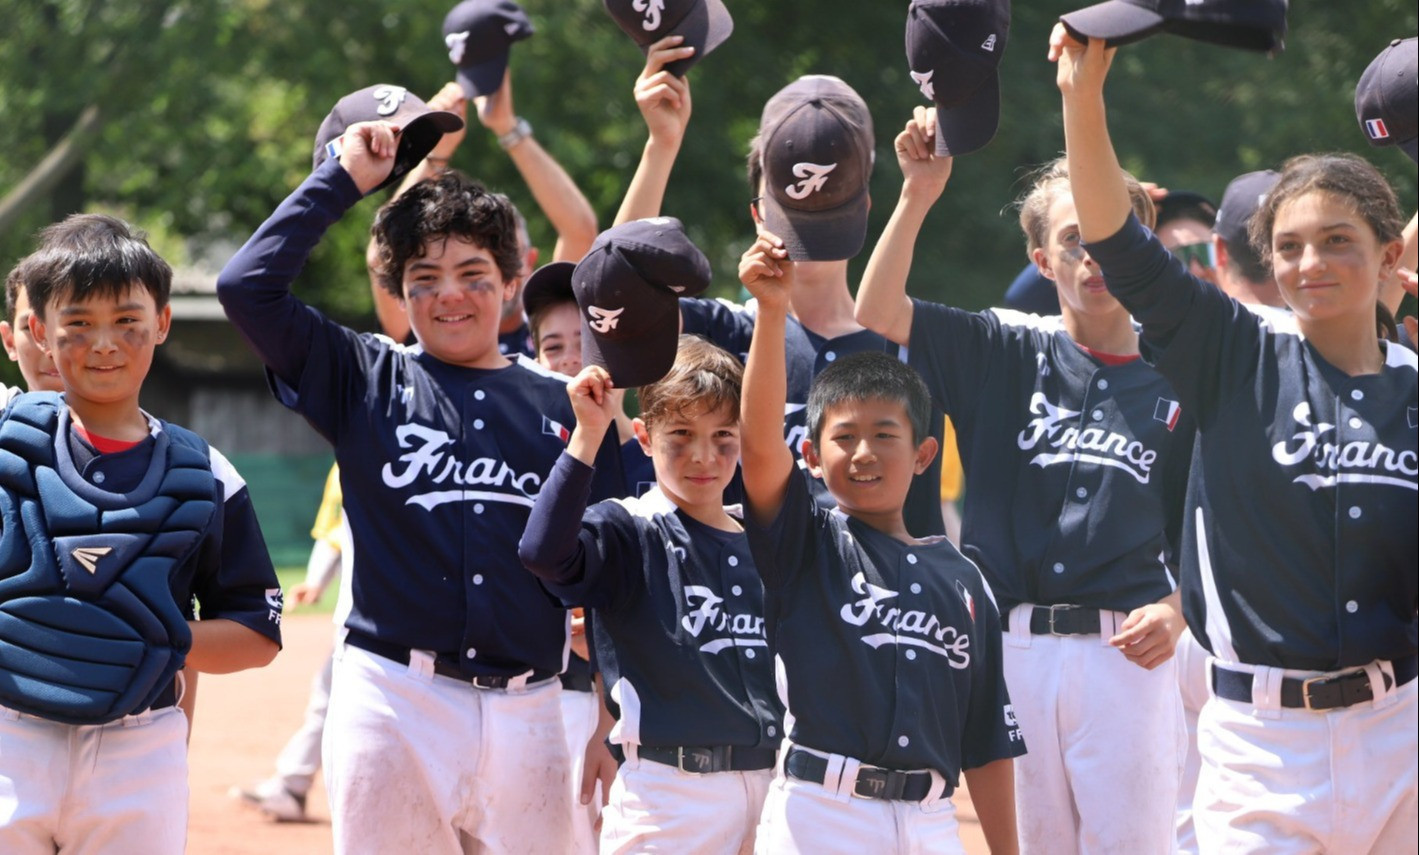 France reaches new record in registered baseball and softball players